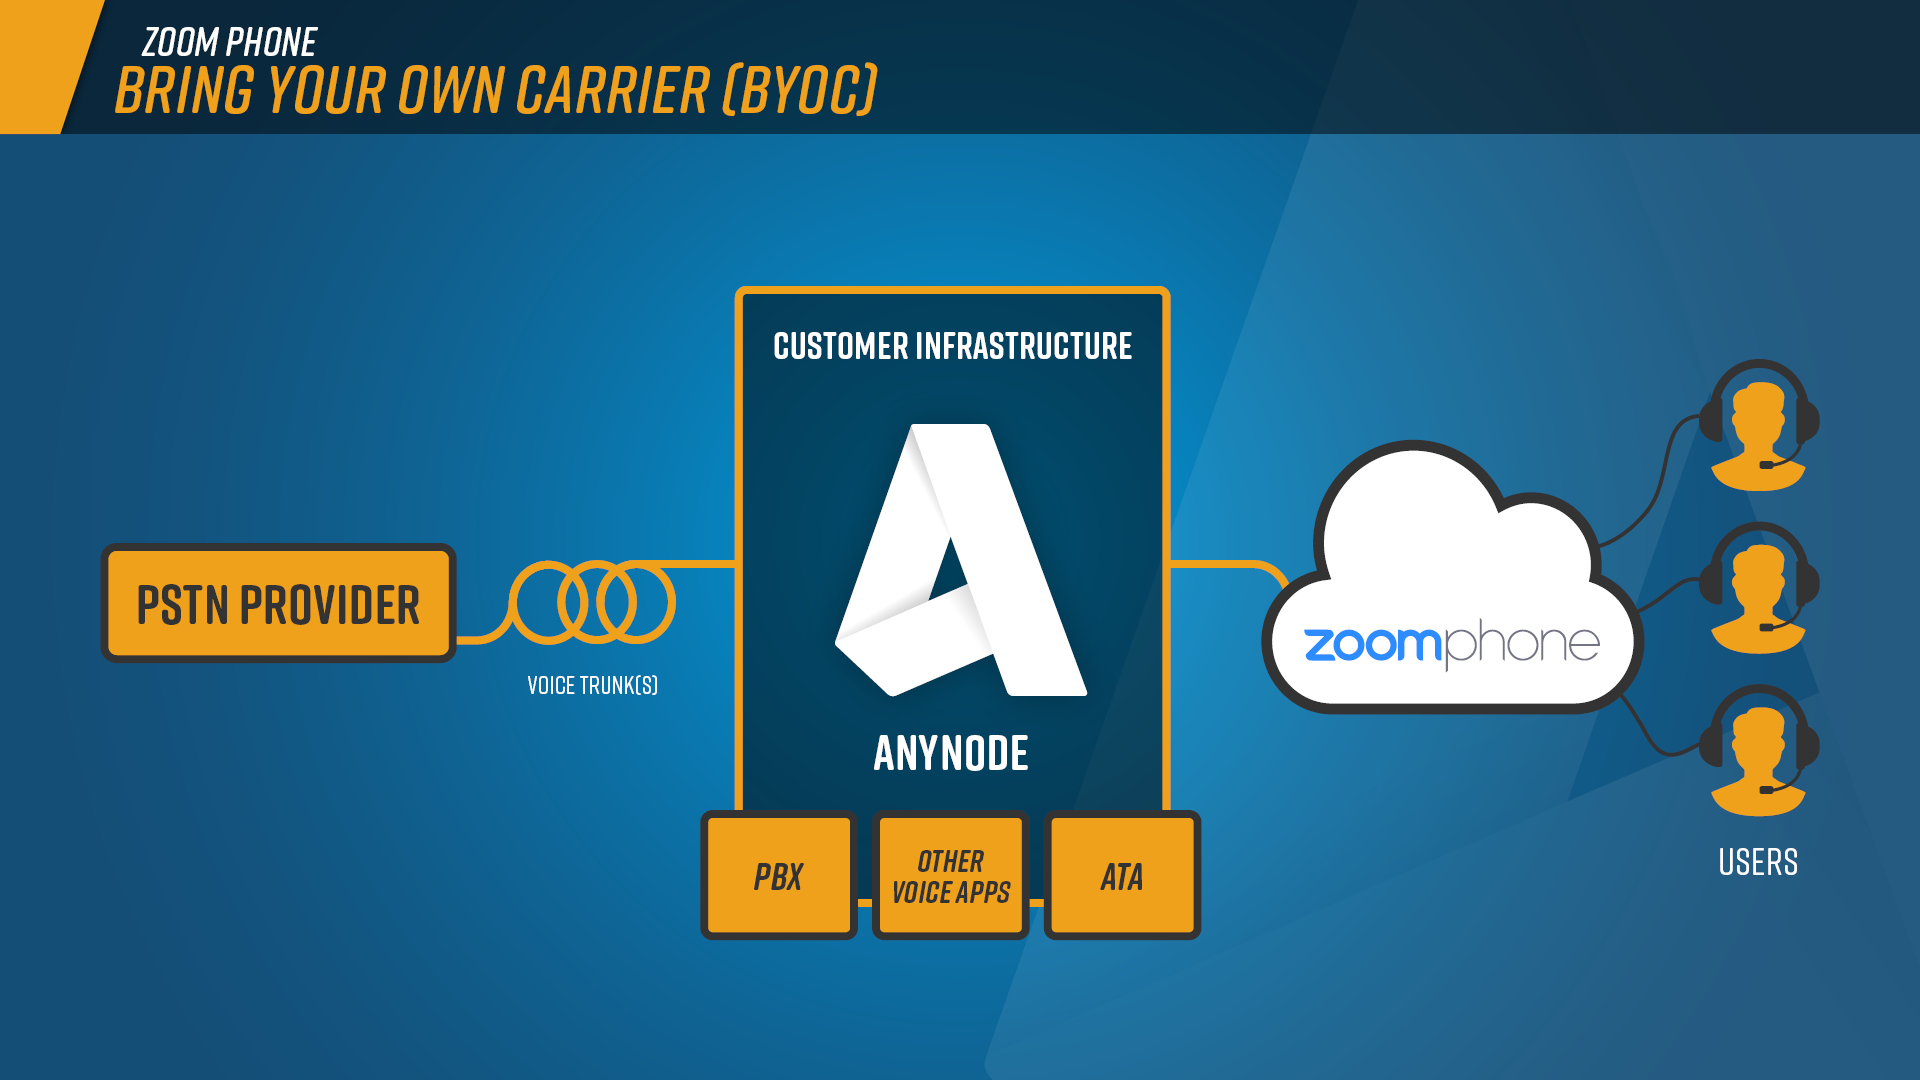 With Zoom Phone Premise Peering, a voice trunk, and anynode, a connection to the Zoom Cloud can be established. Existing infrastructure at the customer’s premises, such as a phone system (PBX) or voice services, can be utilized and integrated.